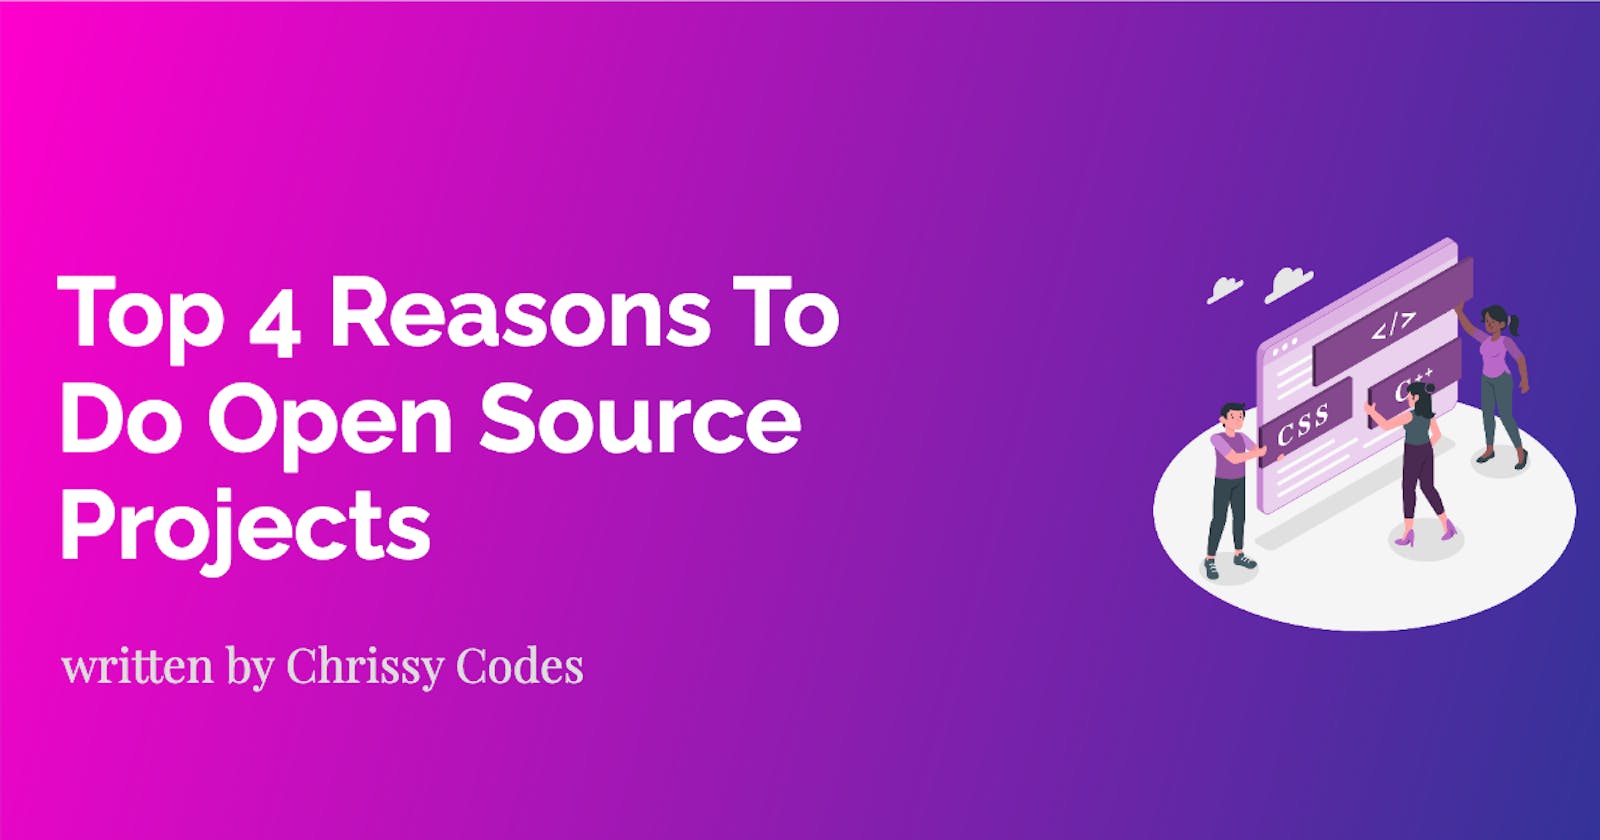 Top 4 Reasons To Do Open Source Projects